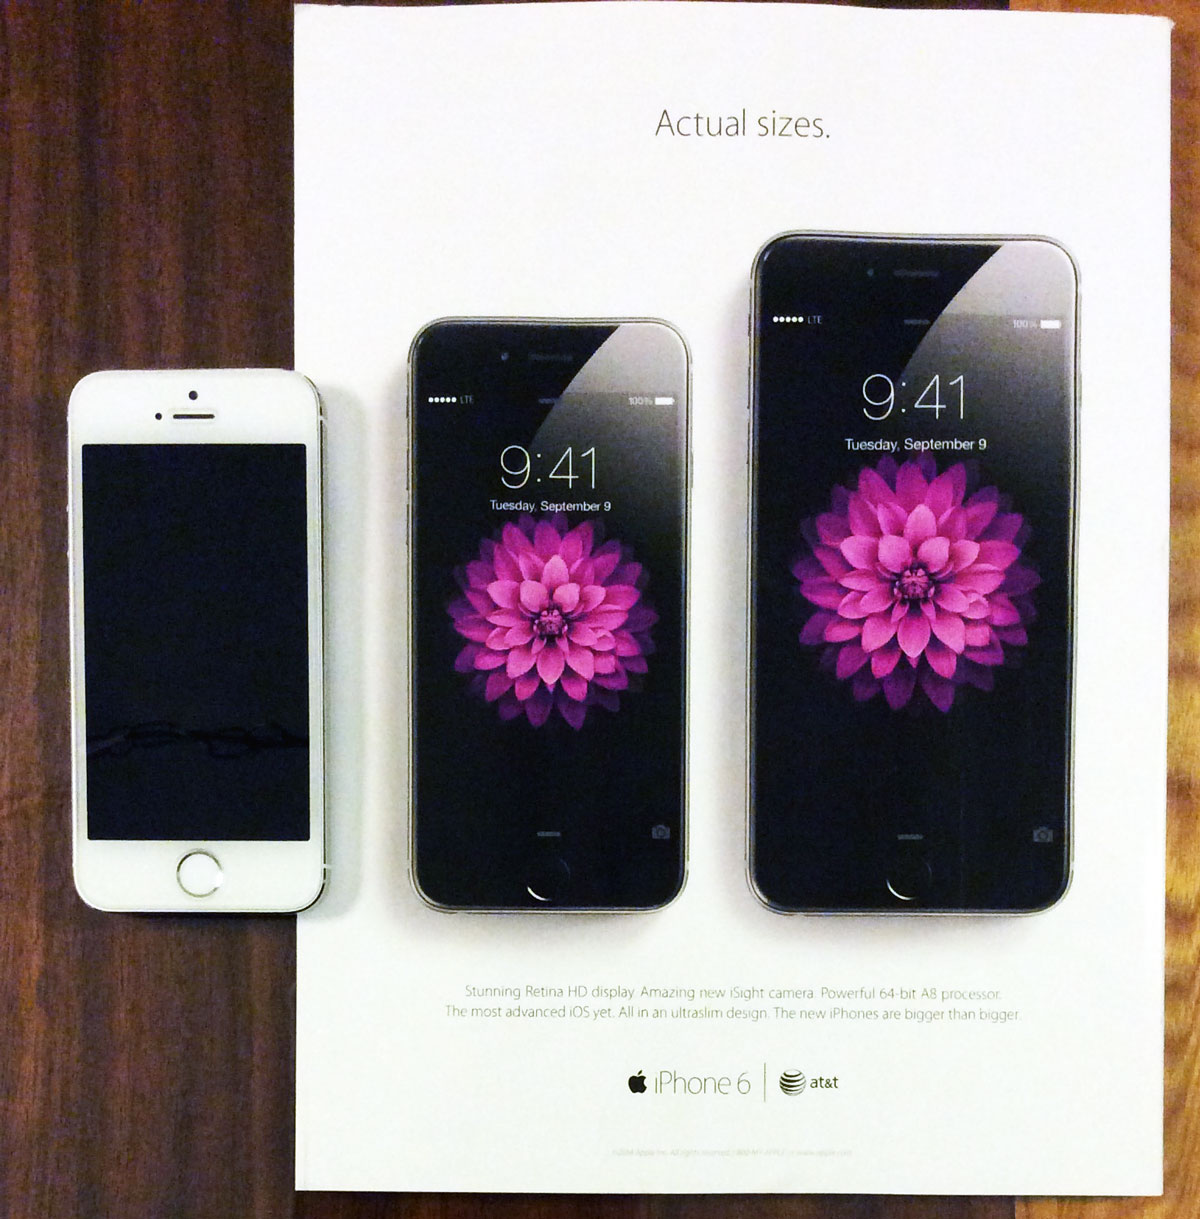 Apple &#039;Actual Sizes&#039; iPhone 6 Ad Featured on the Back Cover of Rolling Stone Magazine [Photo]